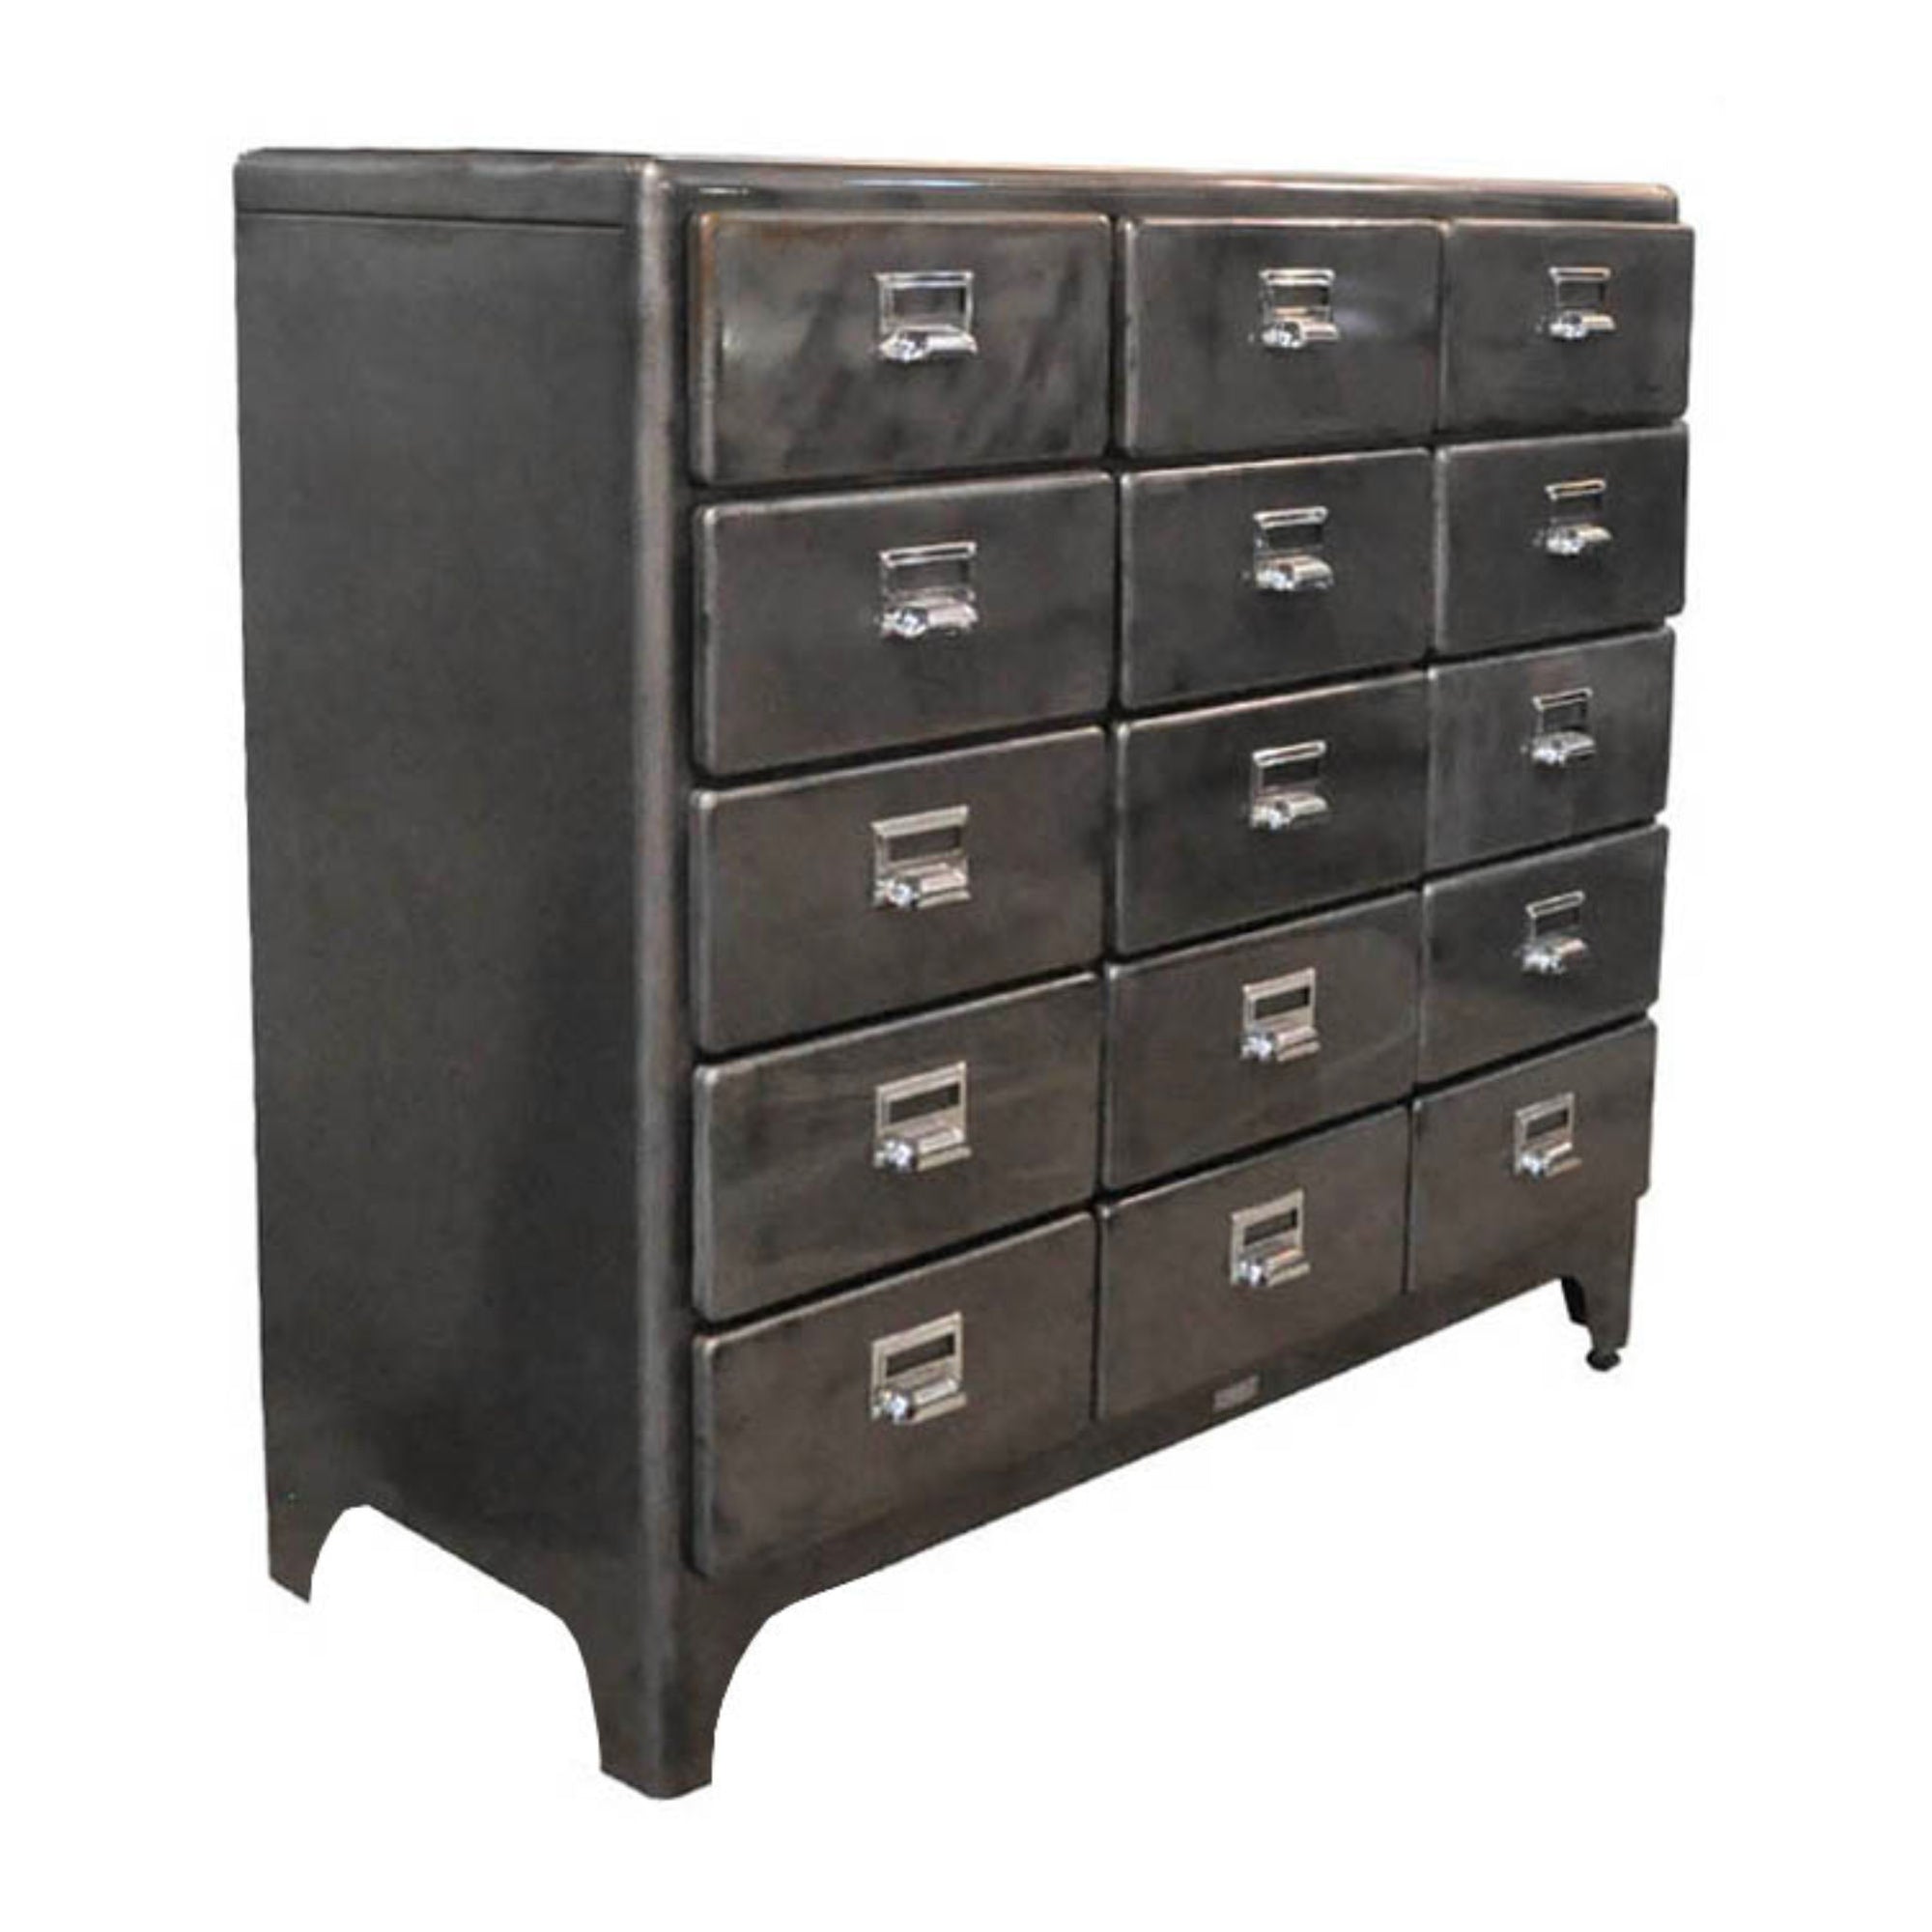 Dulton Cabinet 3 Column by 5 Drawers, raw